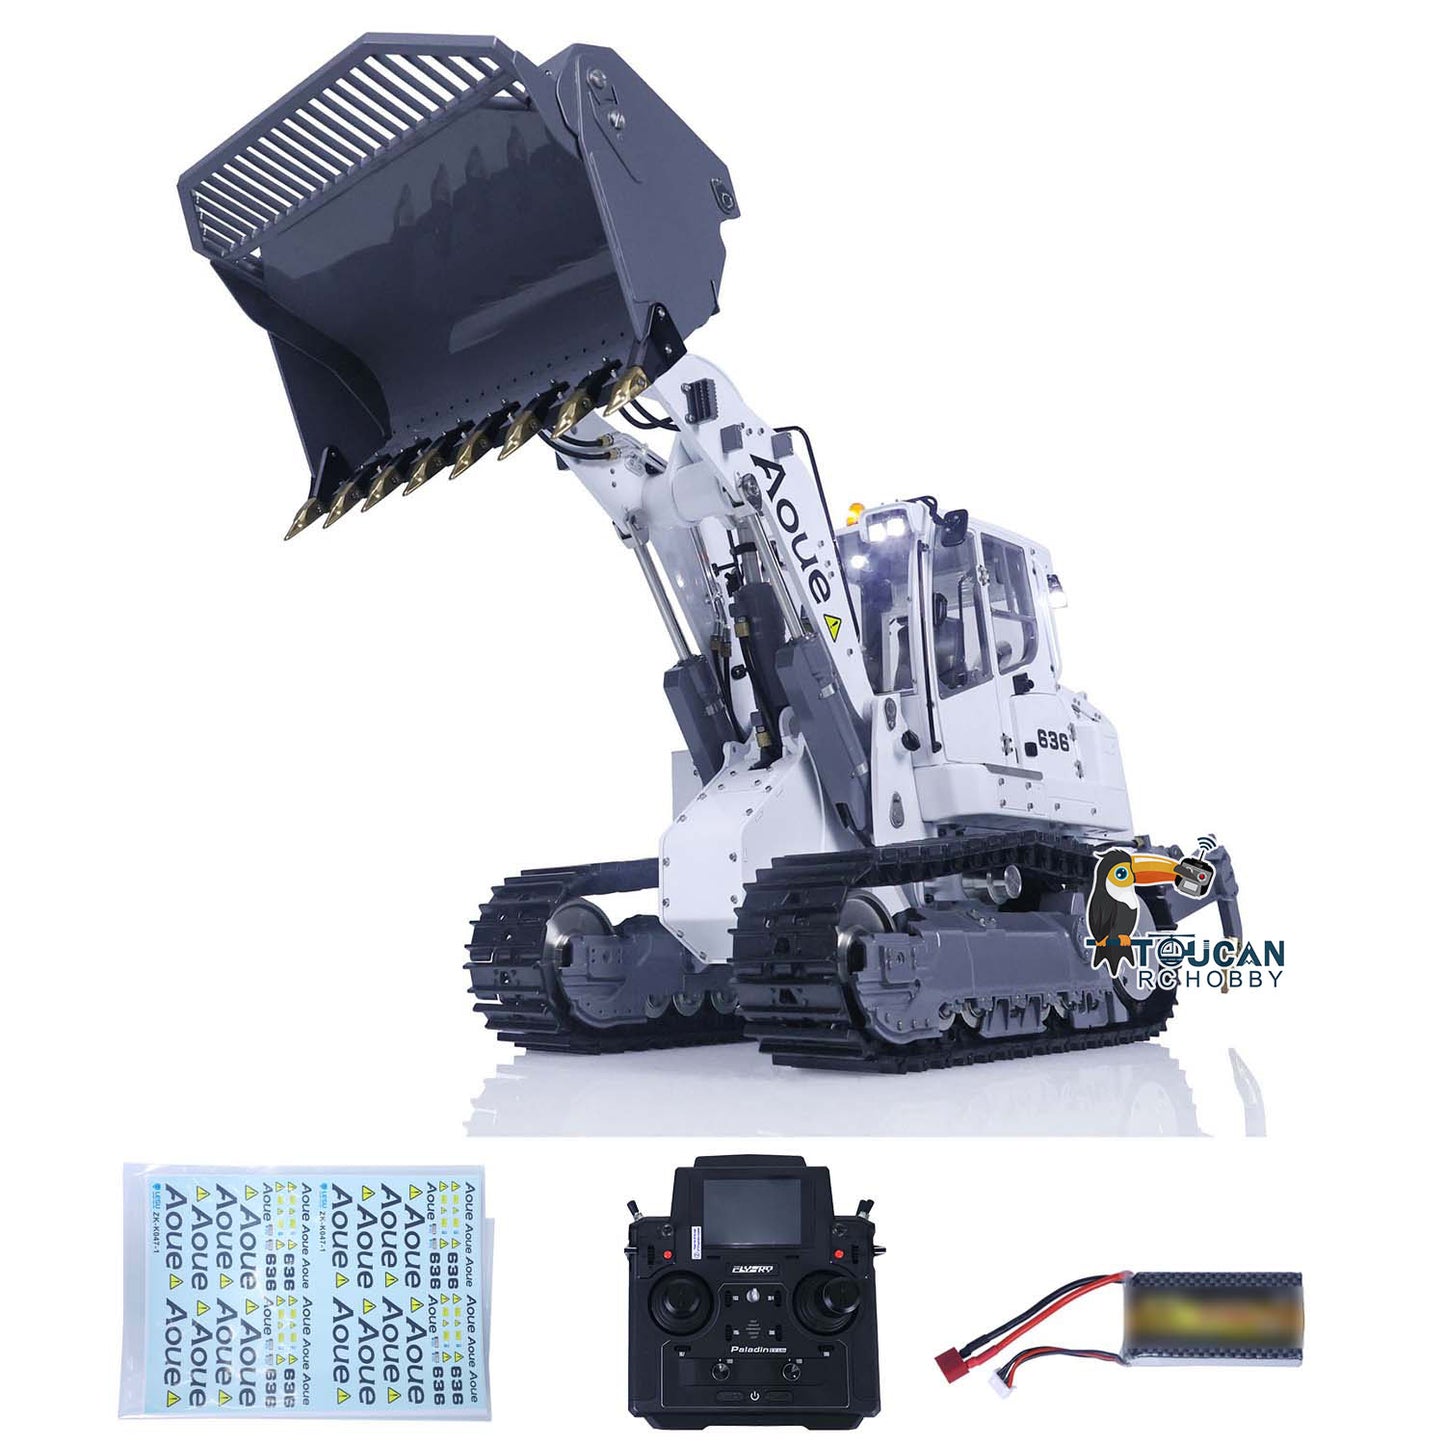 LESU 1/14 Liebhe 636 Hydraulic Construction Vehicles Radio Controlle Track Loader Light Sound Motor Metal Openable Closable Bucket